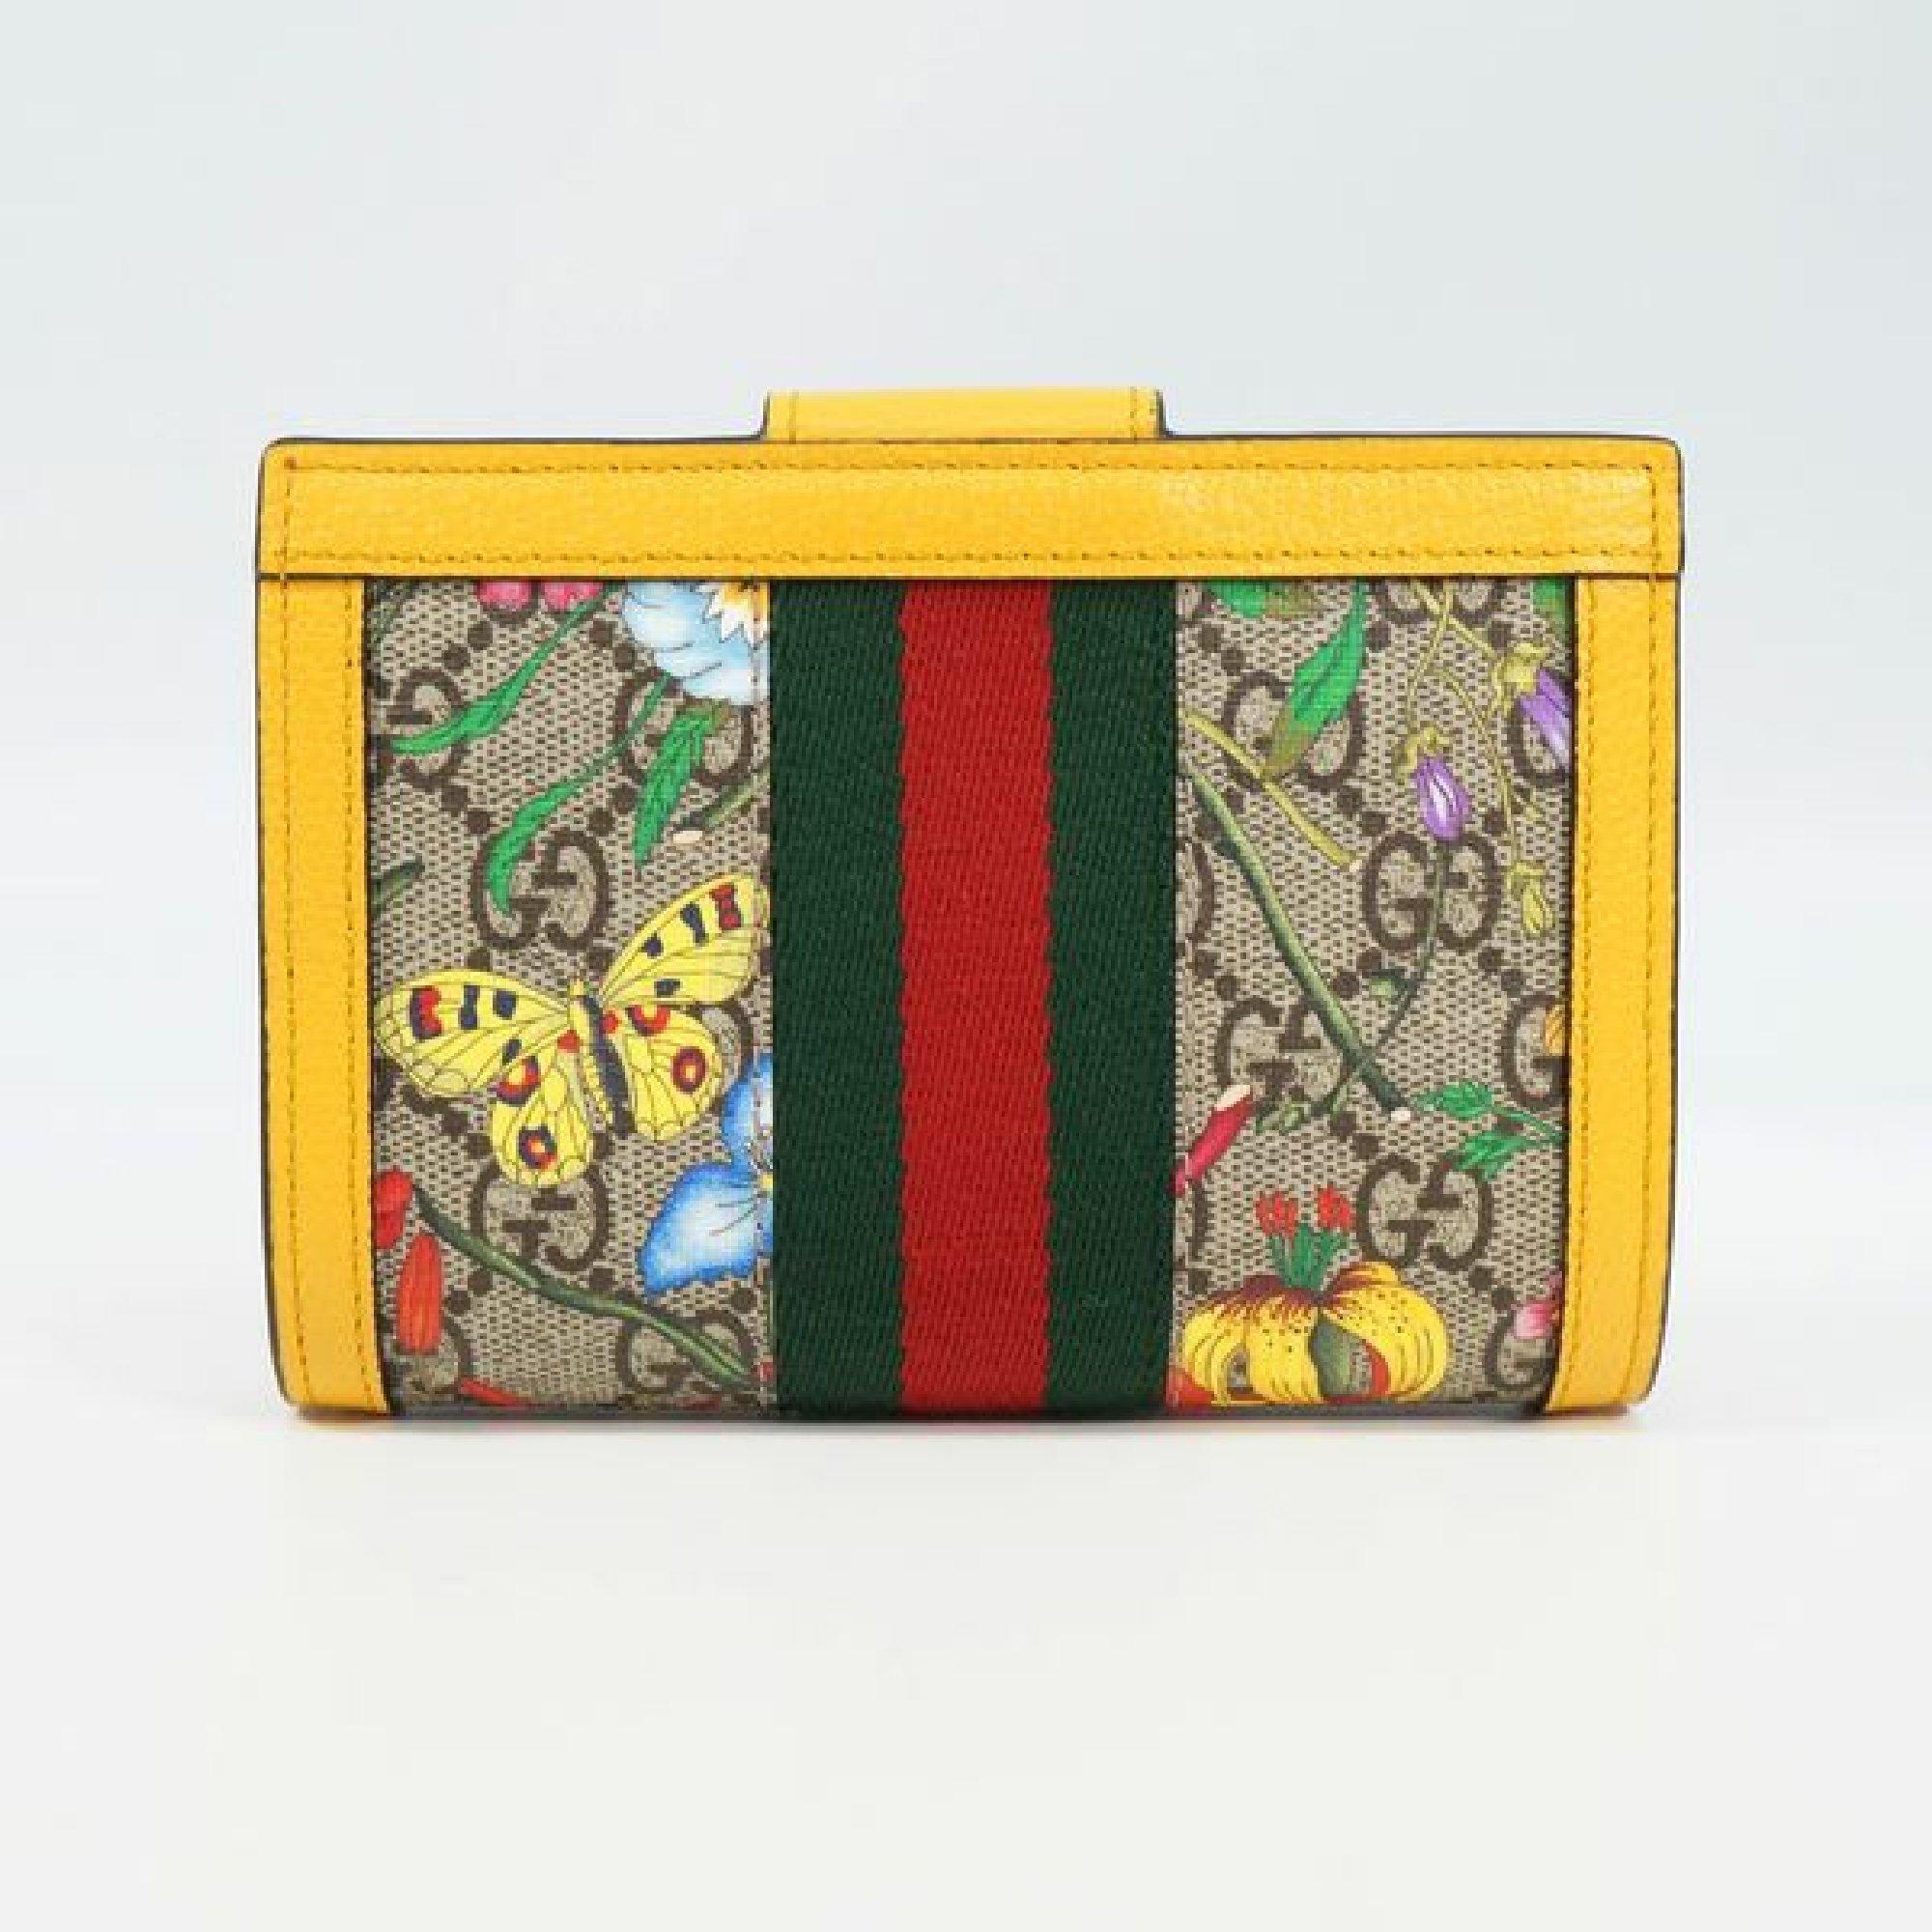 An authentic GUCCI Flora Ophidia unisex passport case 598914 yellow. The color is Yellow. The outside material is GG Supreme canvas. The pattern is Flora  Ophidia. This item is Contemporary. The year of manufacture would be 1986.
Rank
Same as S new